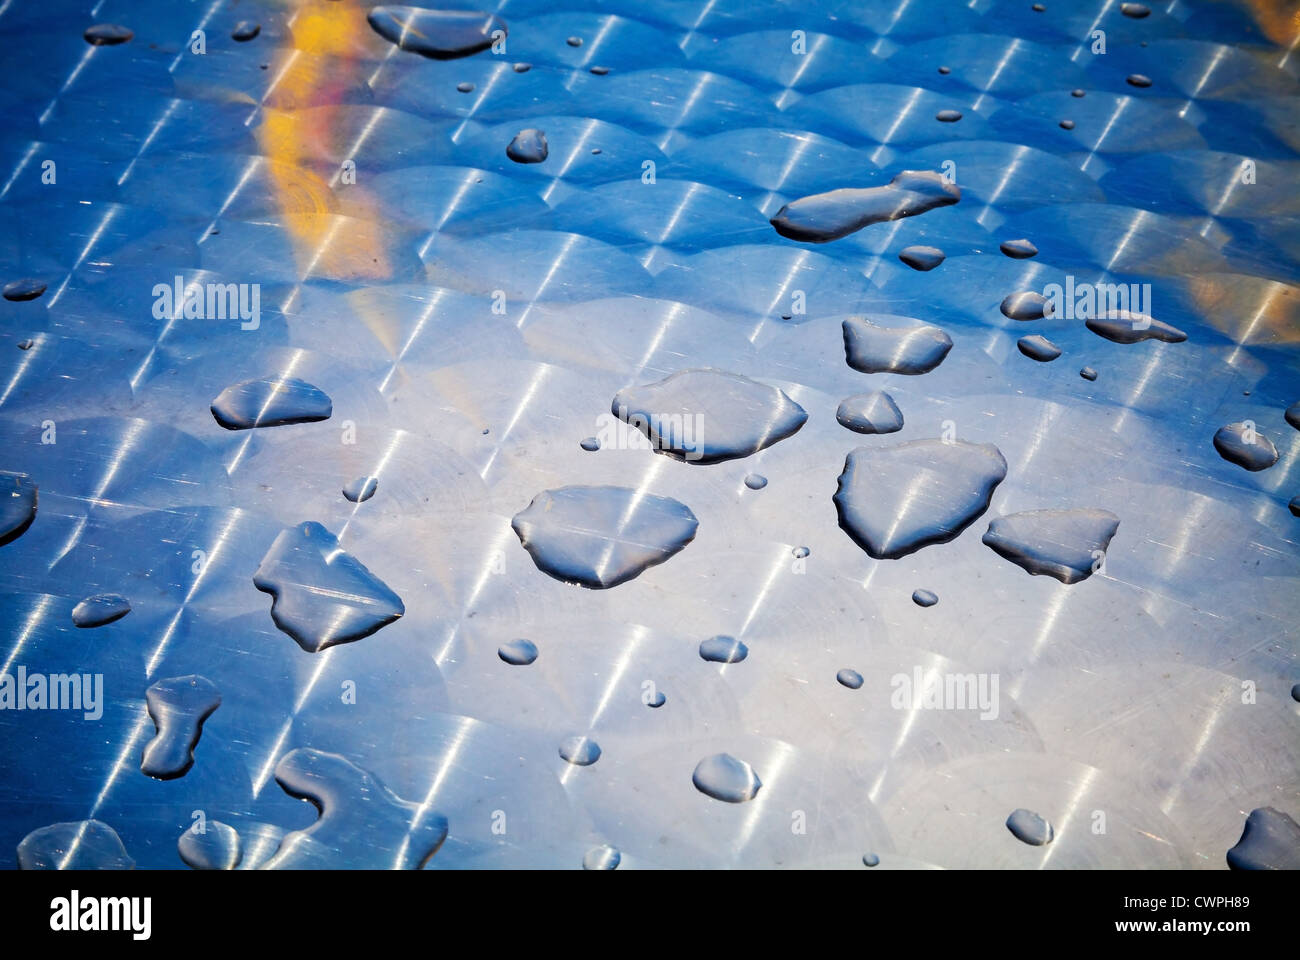 Texture of water drops on shining metal table surface with scratches and circular milling Stock Photo